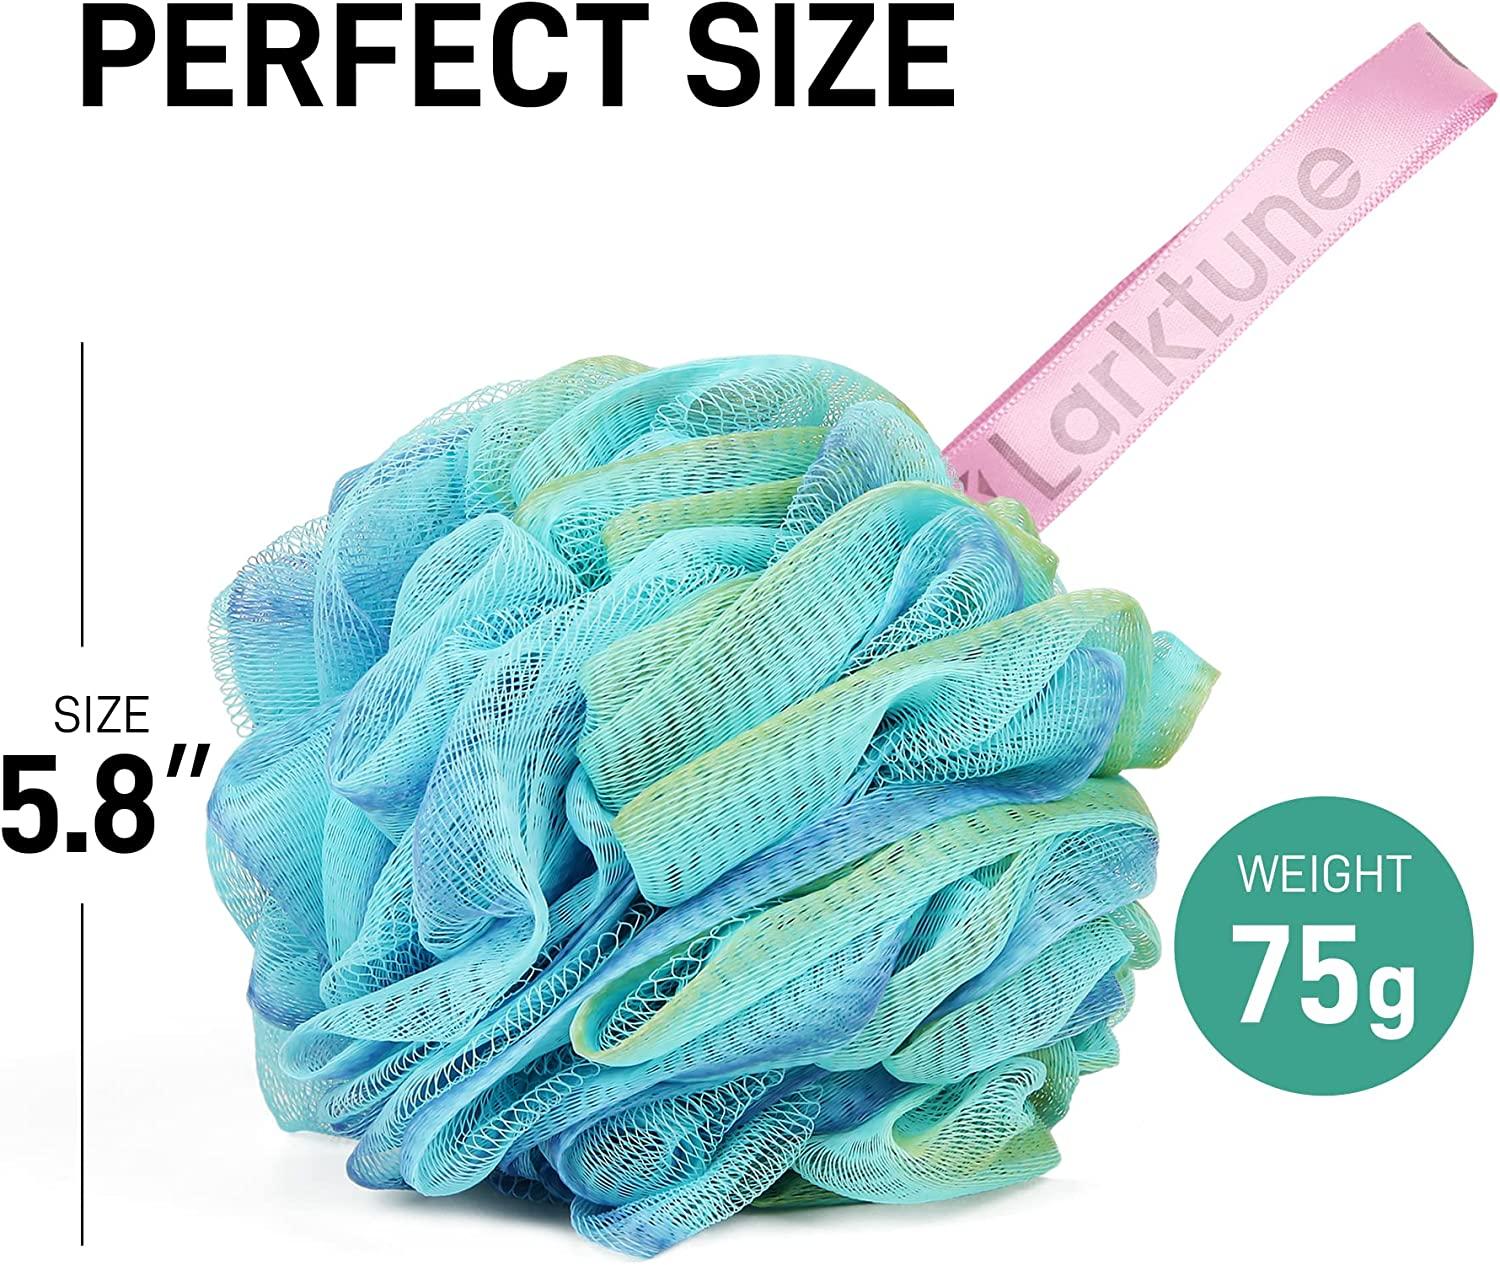 Shower Loofah Bath Sponge XL 75g - 4 Pack Large Soft Nylon Mesh Puff for  Body Wash, Loofah Shower Exfoliating Scrubber for Women and Men, Full  Cleanse, Beauty Bathing Accessories Summer